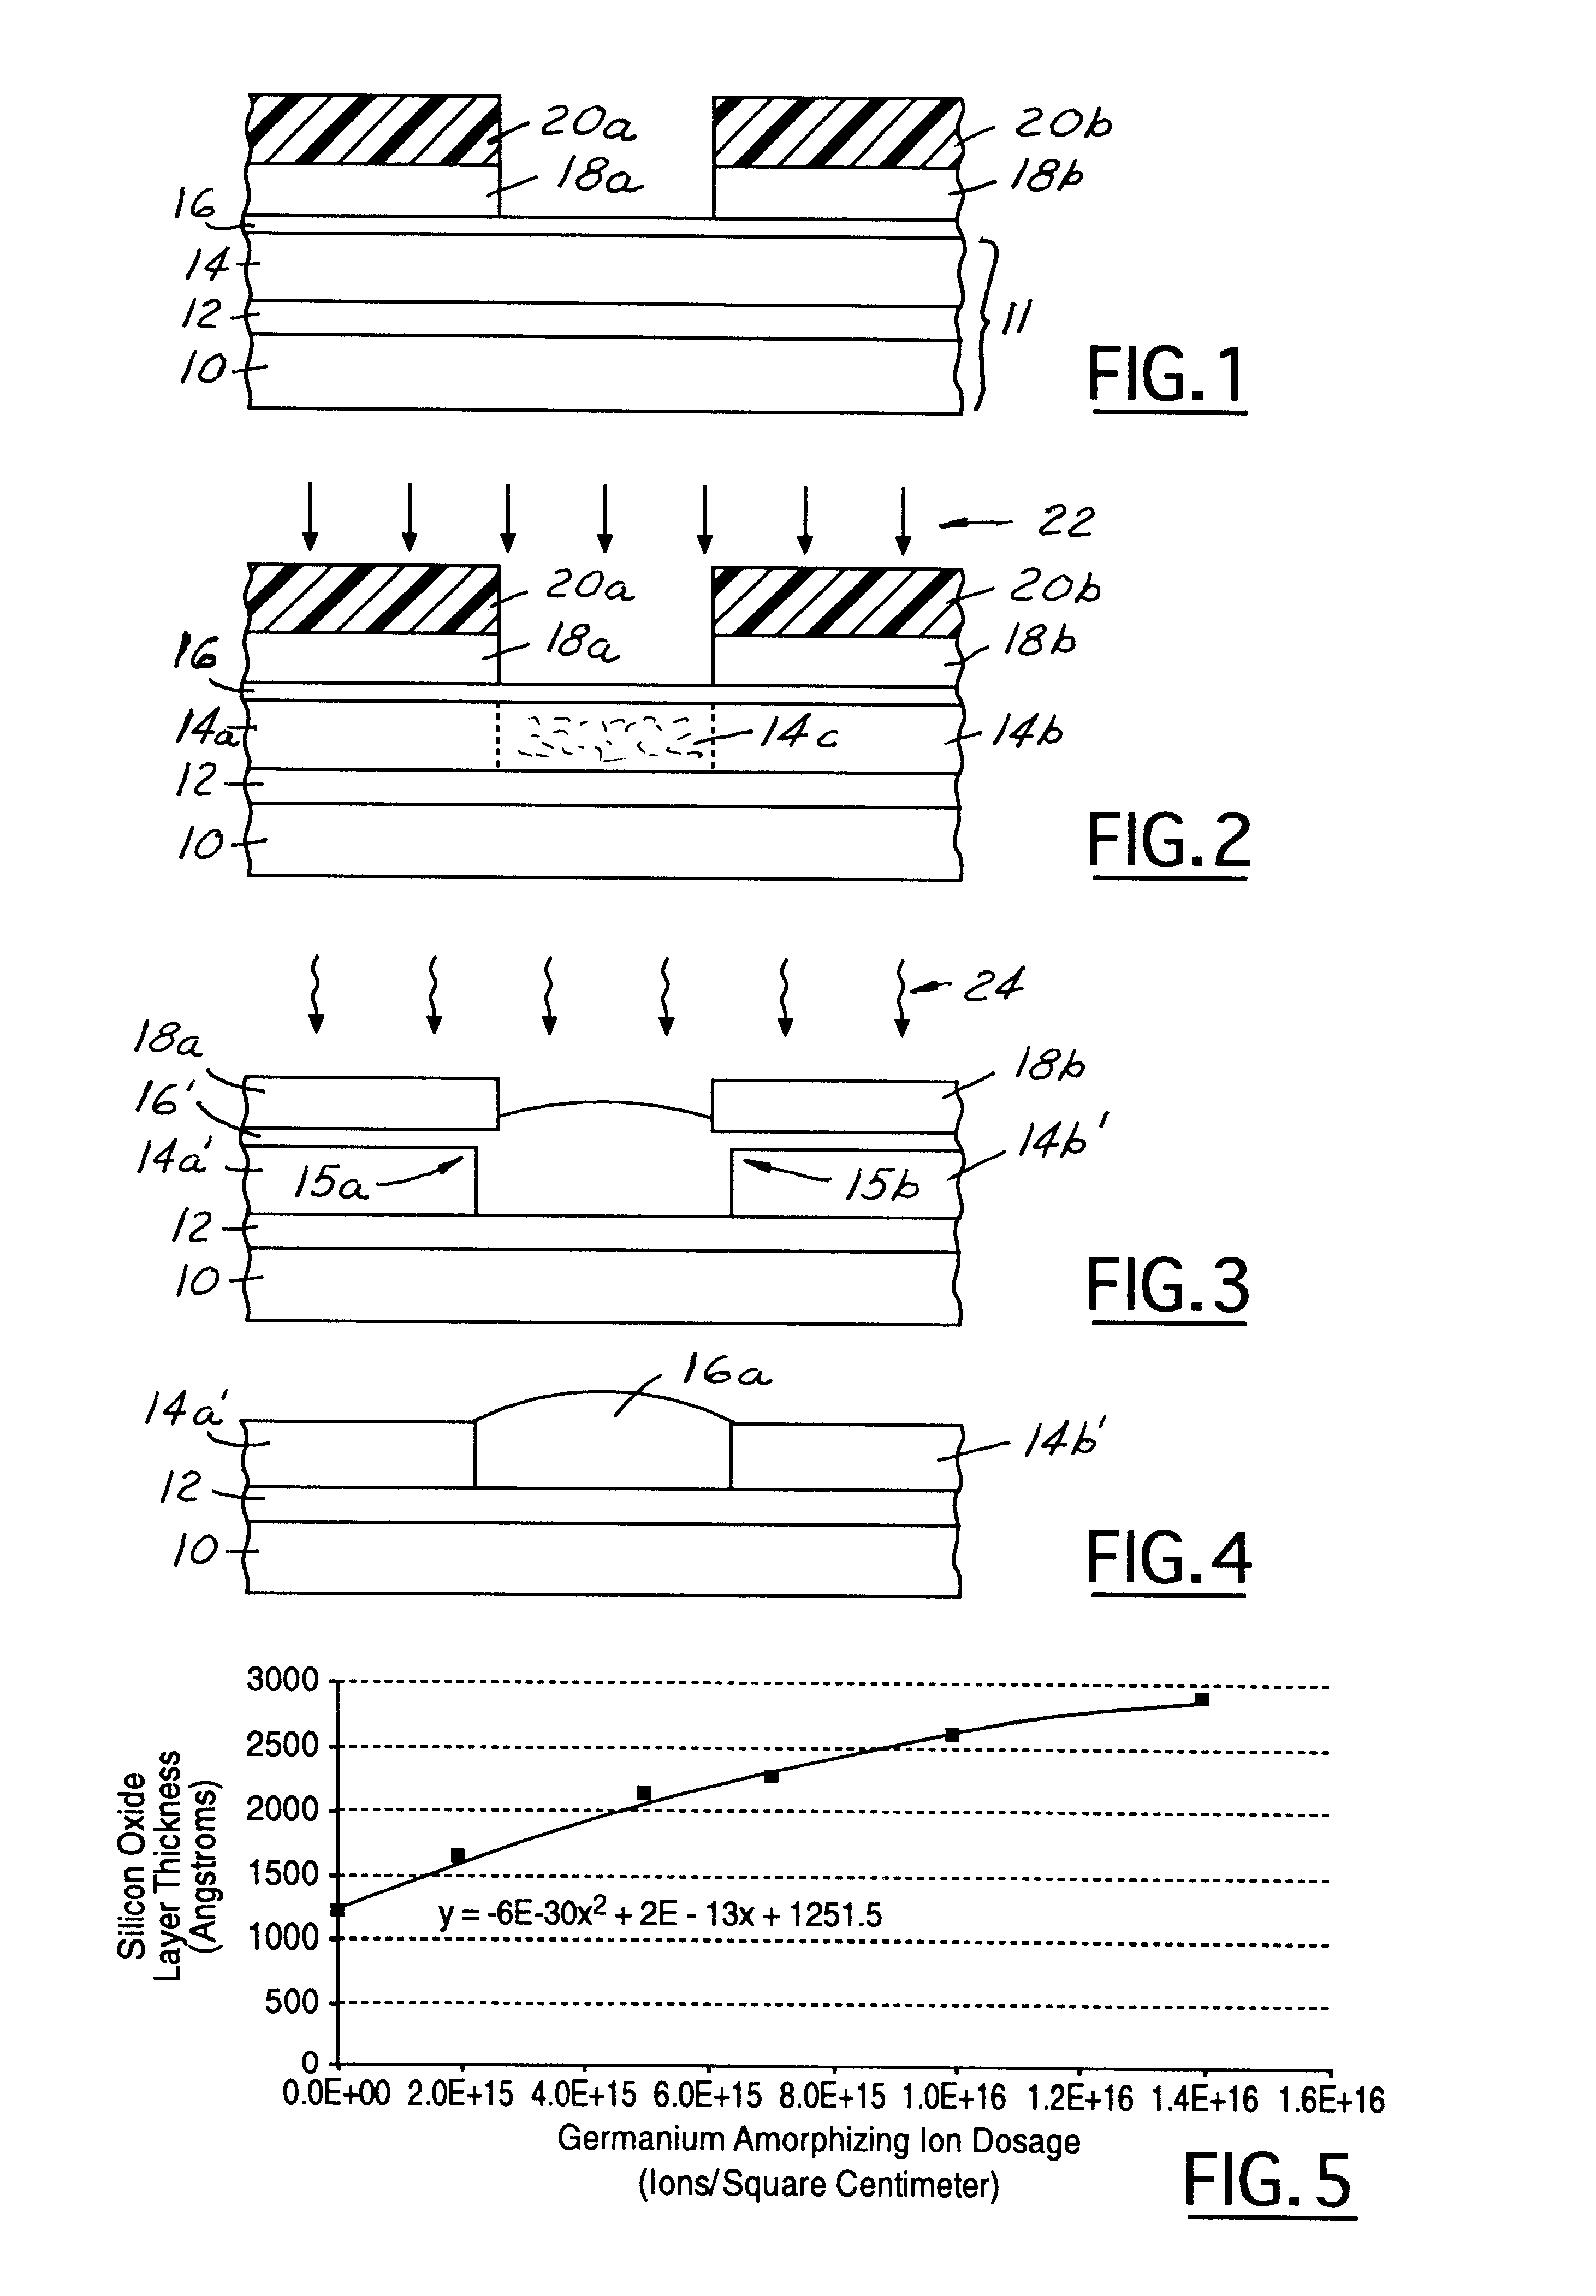 Amorphizing ion implant local oxidation of silicon (LOCOS) method for forming an isolation region